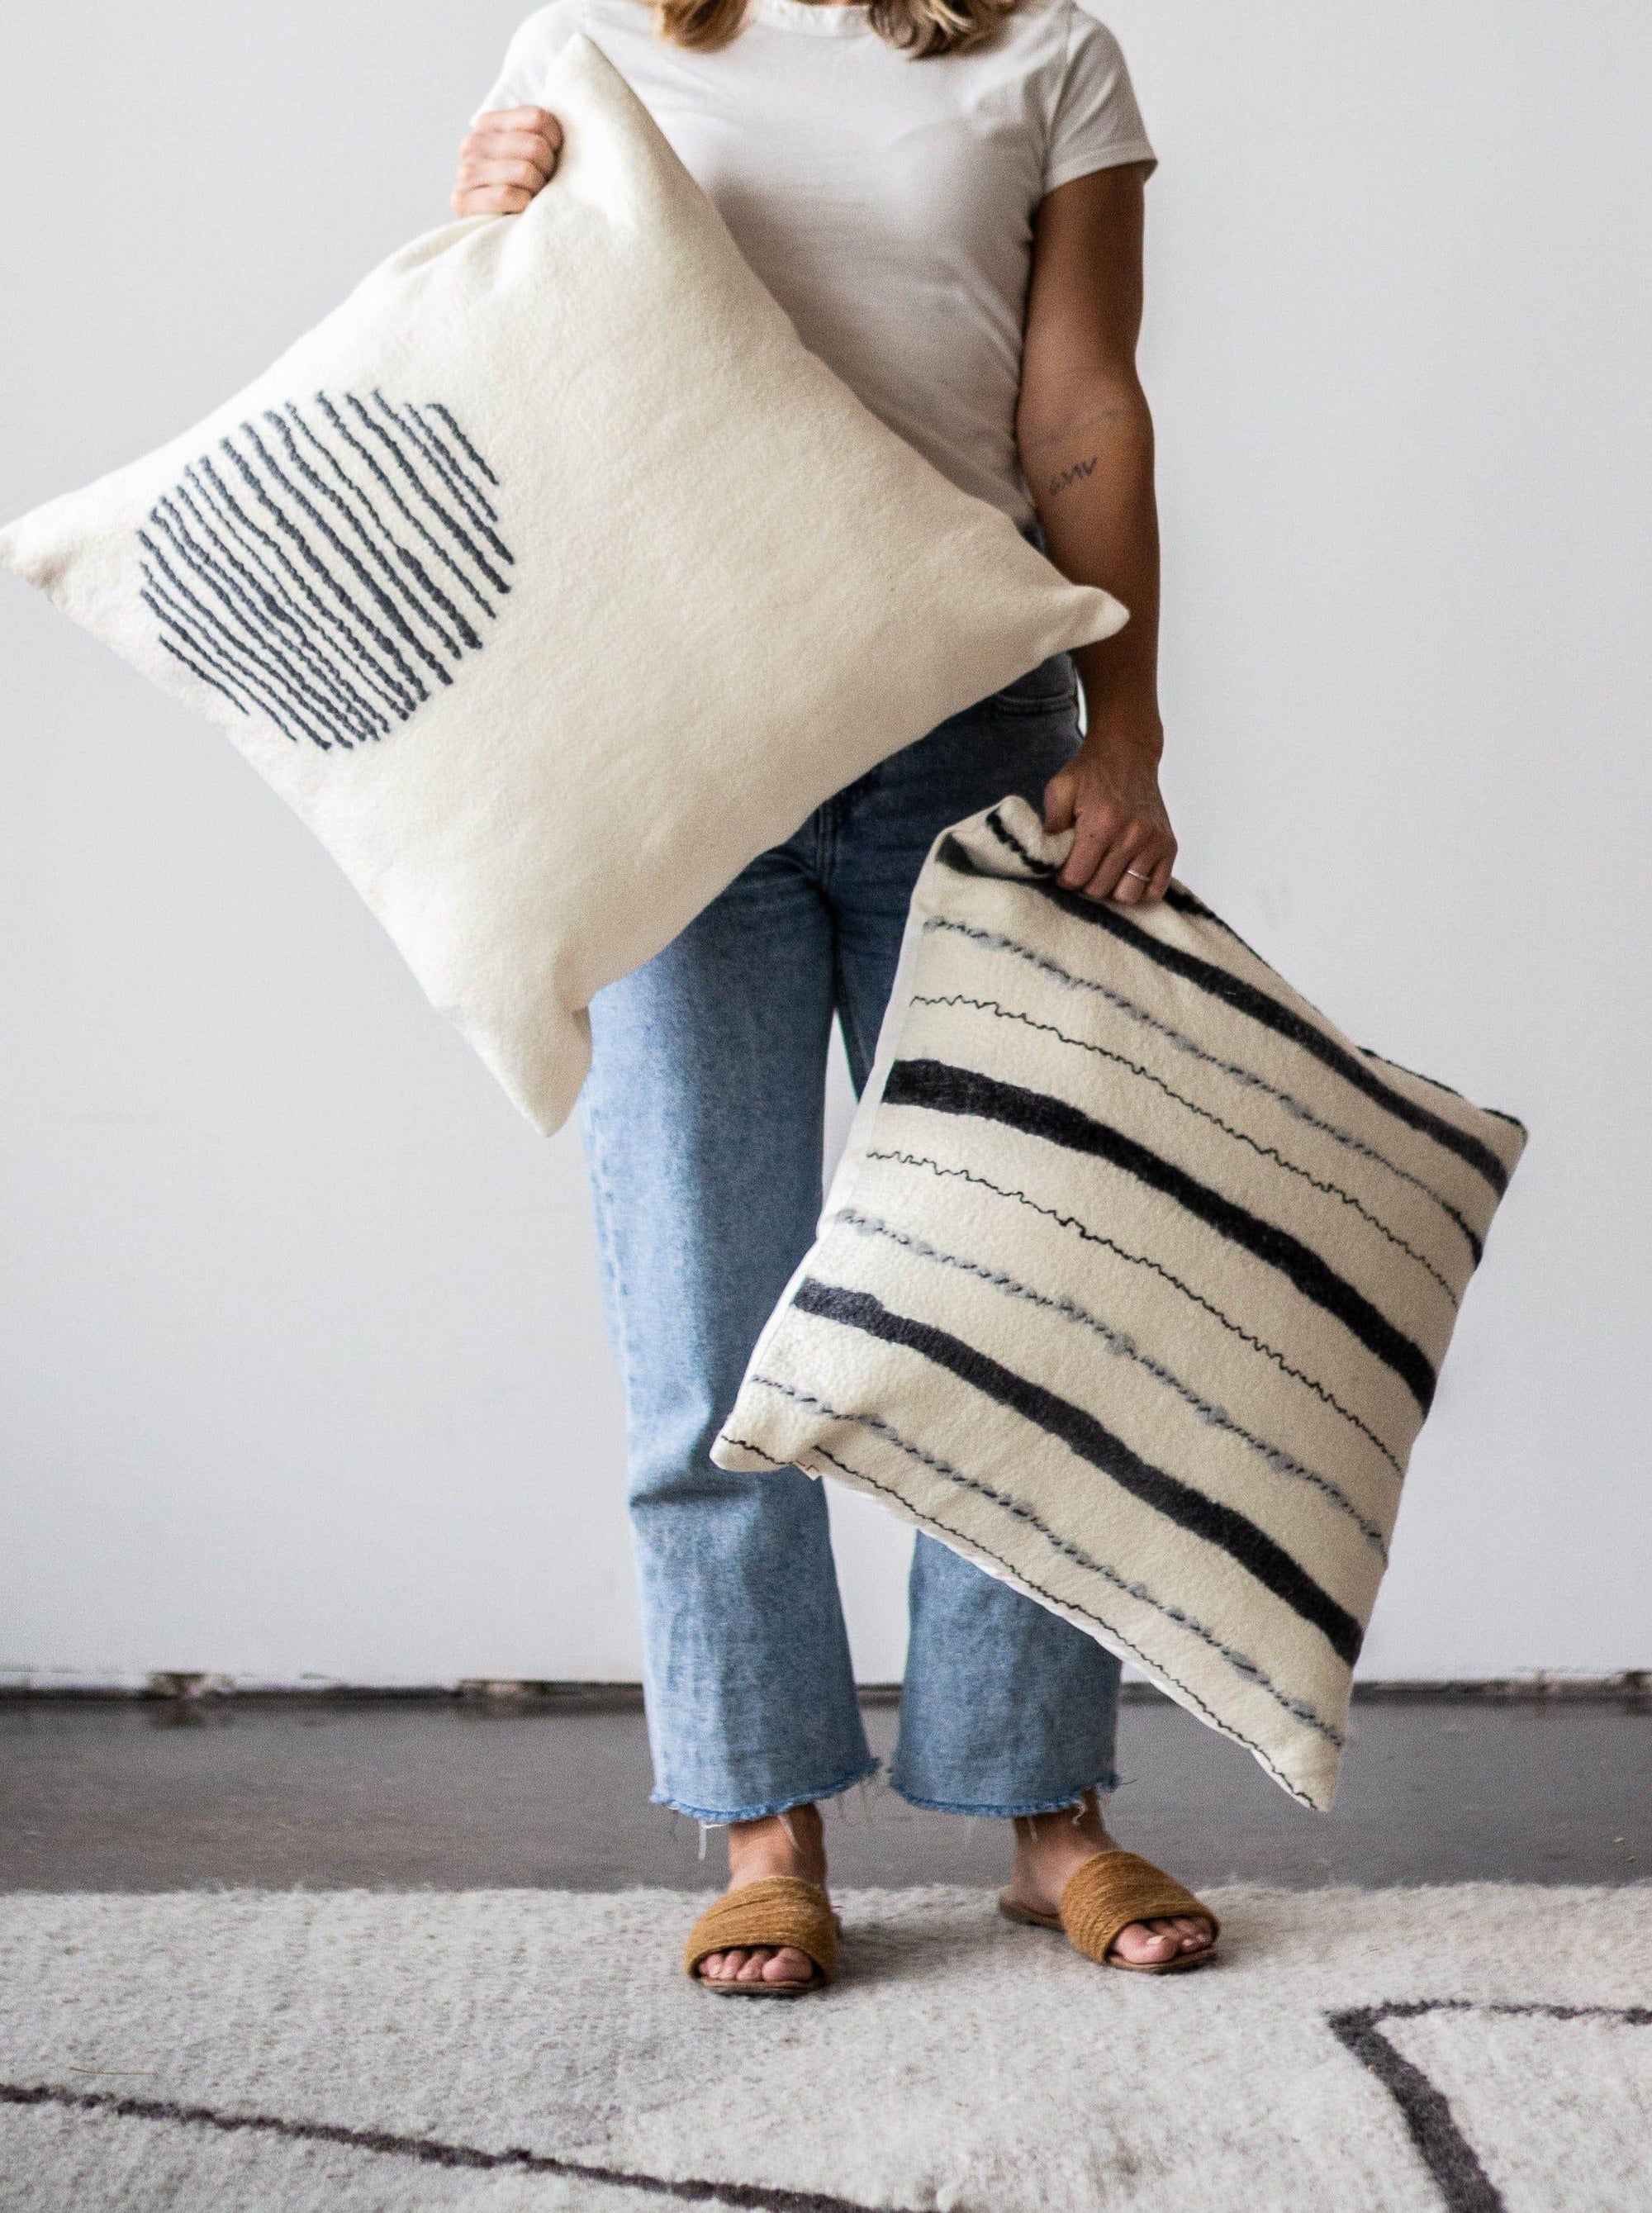 Chunky Stripe Pillow kanju Interiors African décor handmade natural organic color accent pillow cushion throw decorative lounge comfortable comfy unique modern contemporary stylish soft accent durable minimal couch chair bed luxury hand made home good gift hand felted felt merino wool mohair yarn hand dyed felting natural white charcoal grey stripes lines 